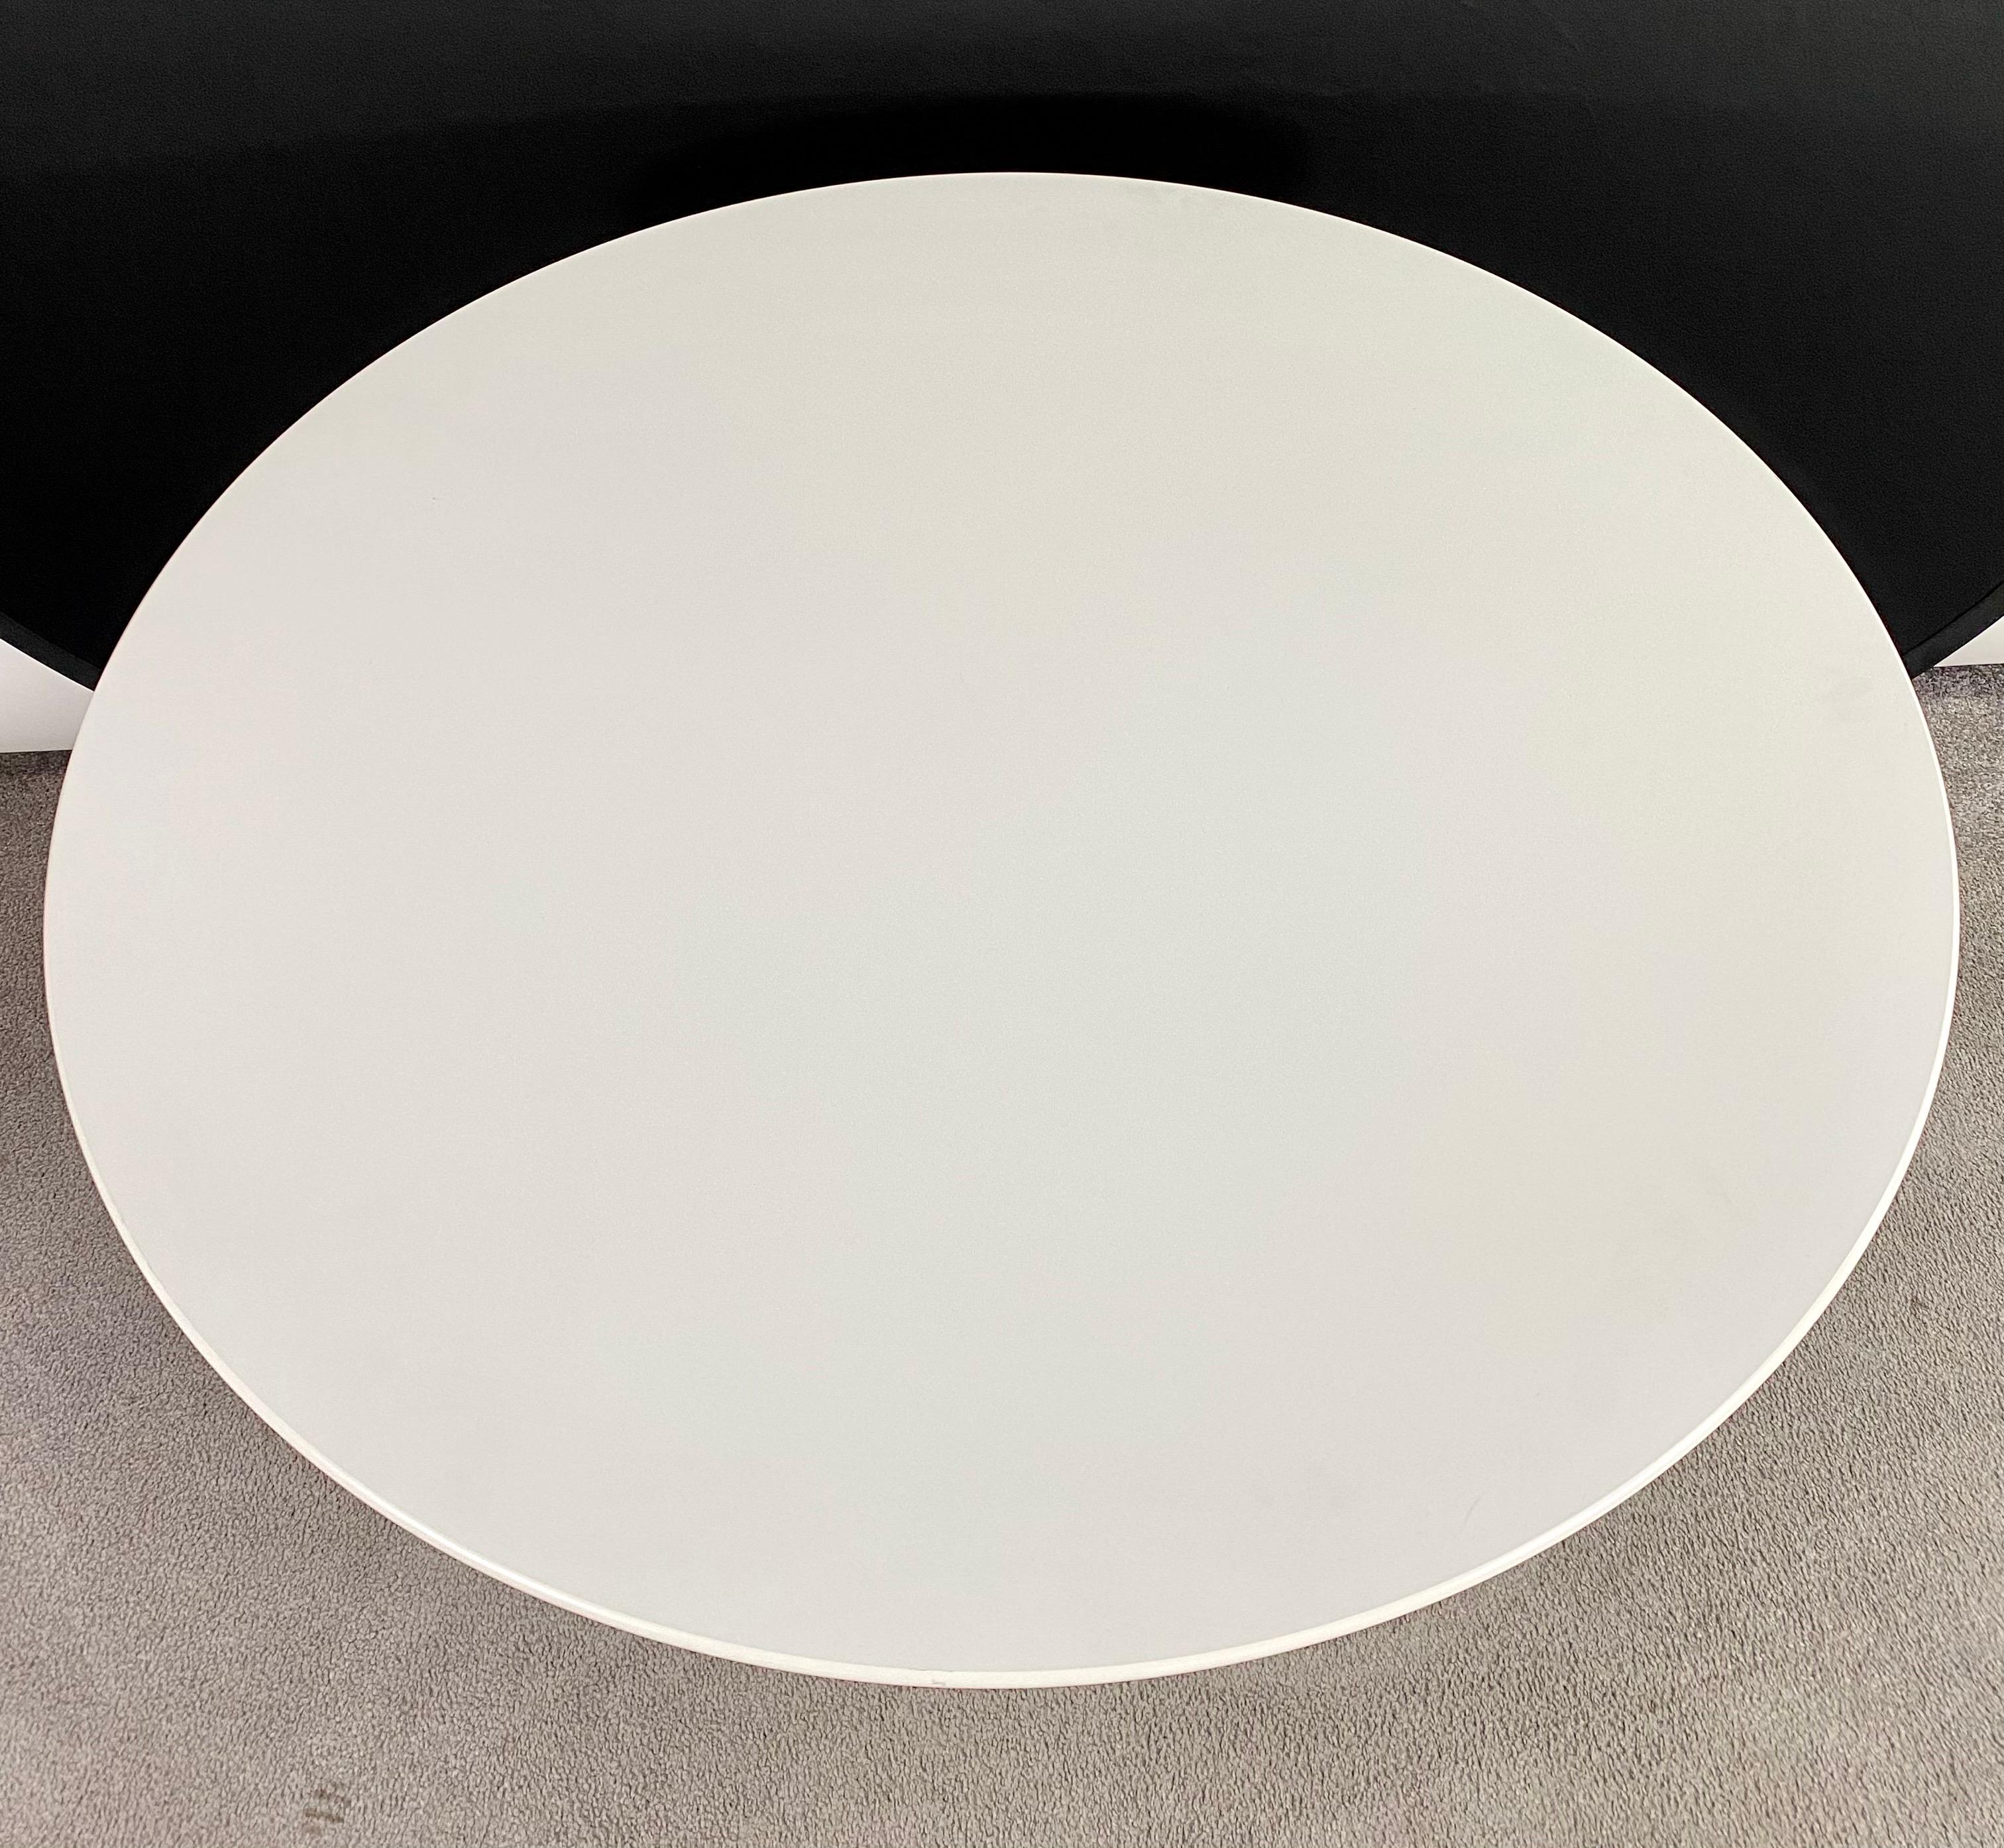 Eero Saarinen for Knoll Studios MCM Tulip White Dining or Center Table, Signed  2